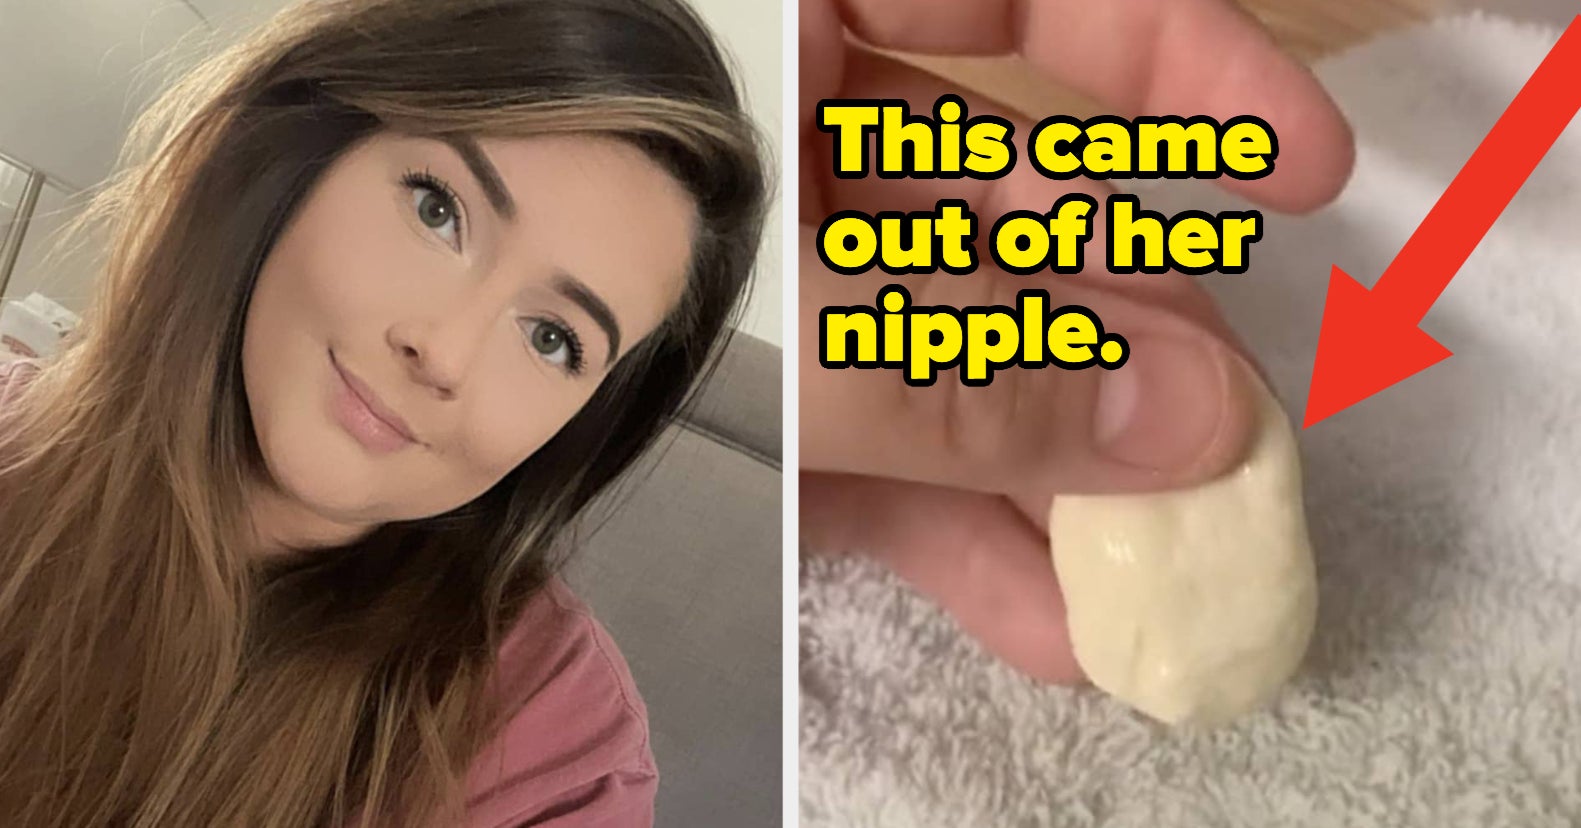 Don't Freak Out About That Viral 'Milk Duct' Image, It's Not